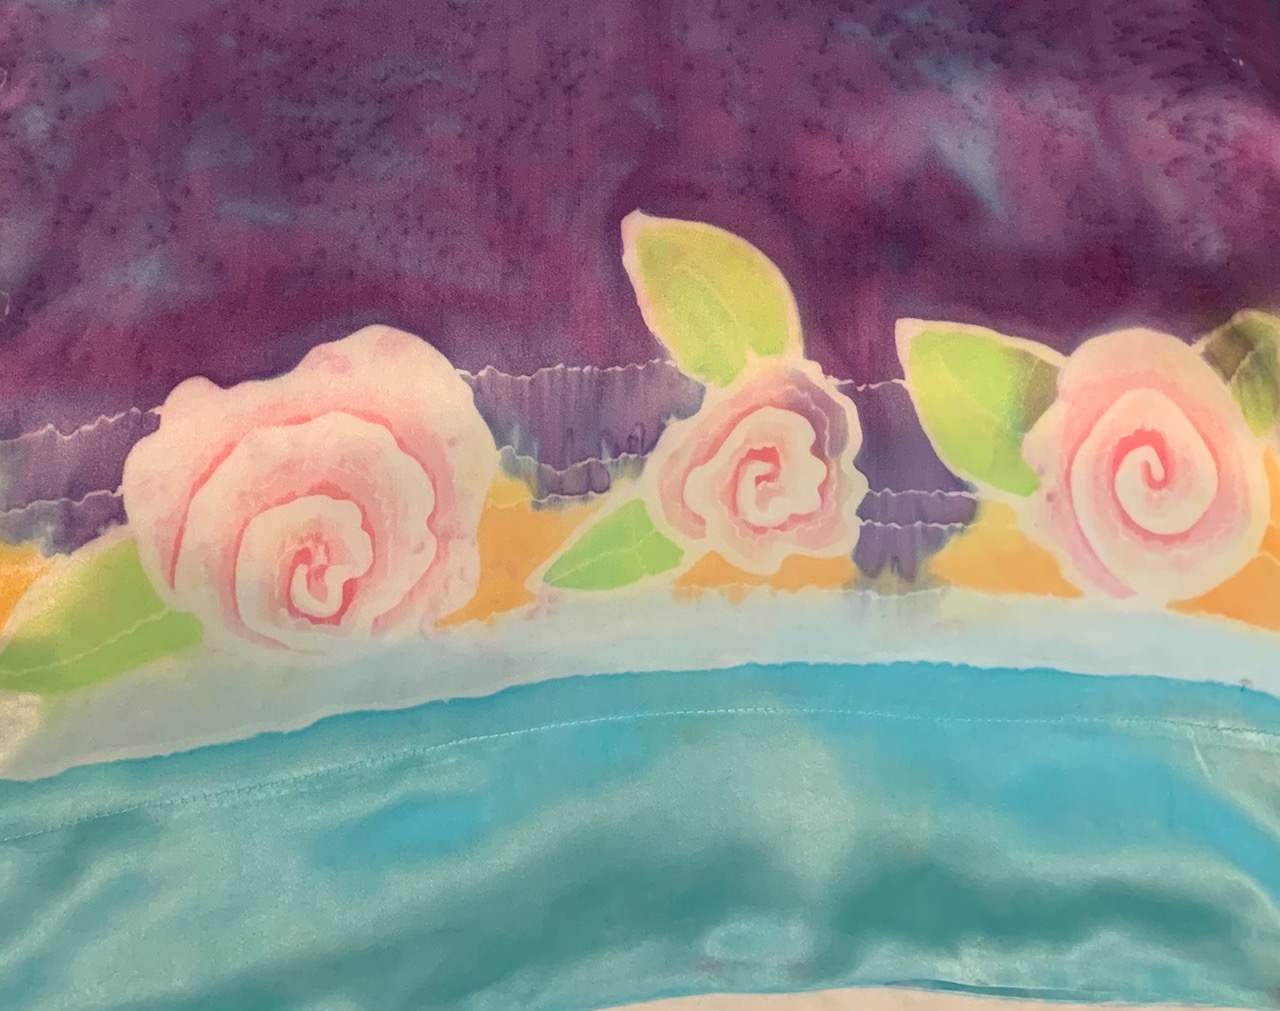 A painting of roses on the side of a cake.